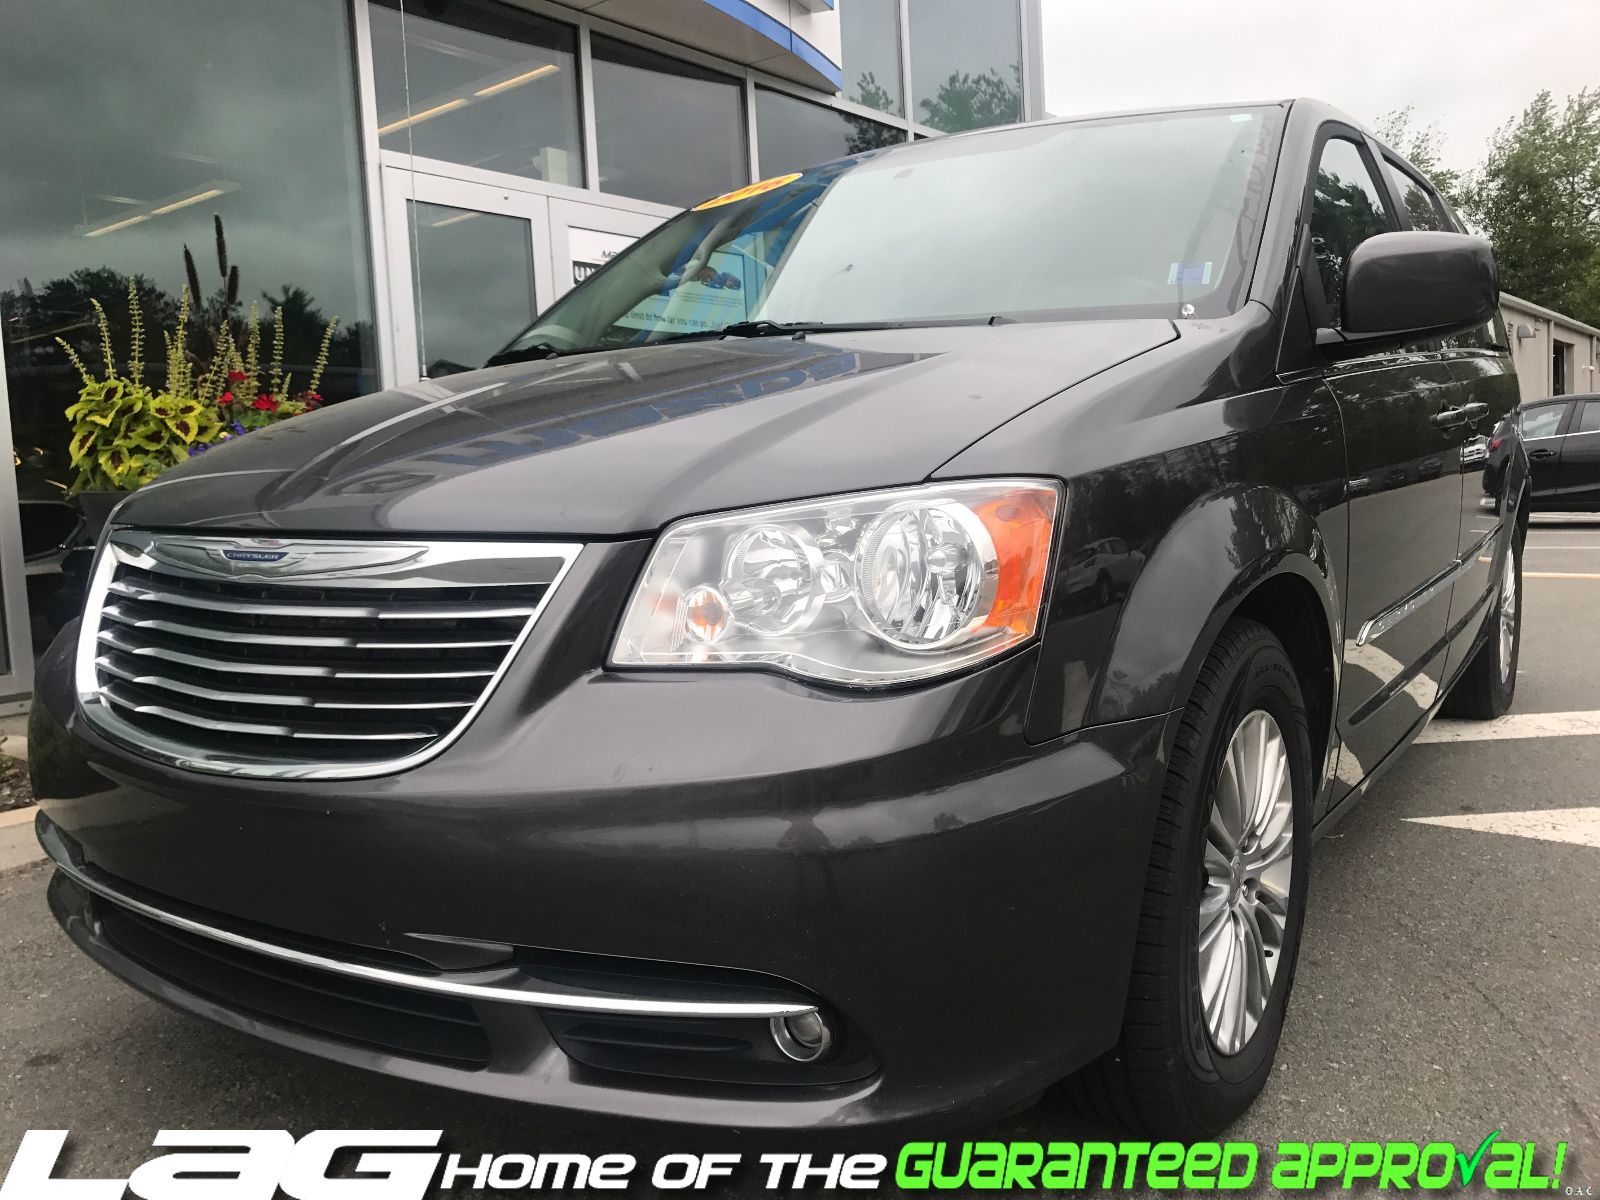 chrysler town and country van for sale